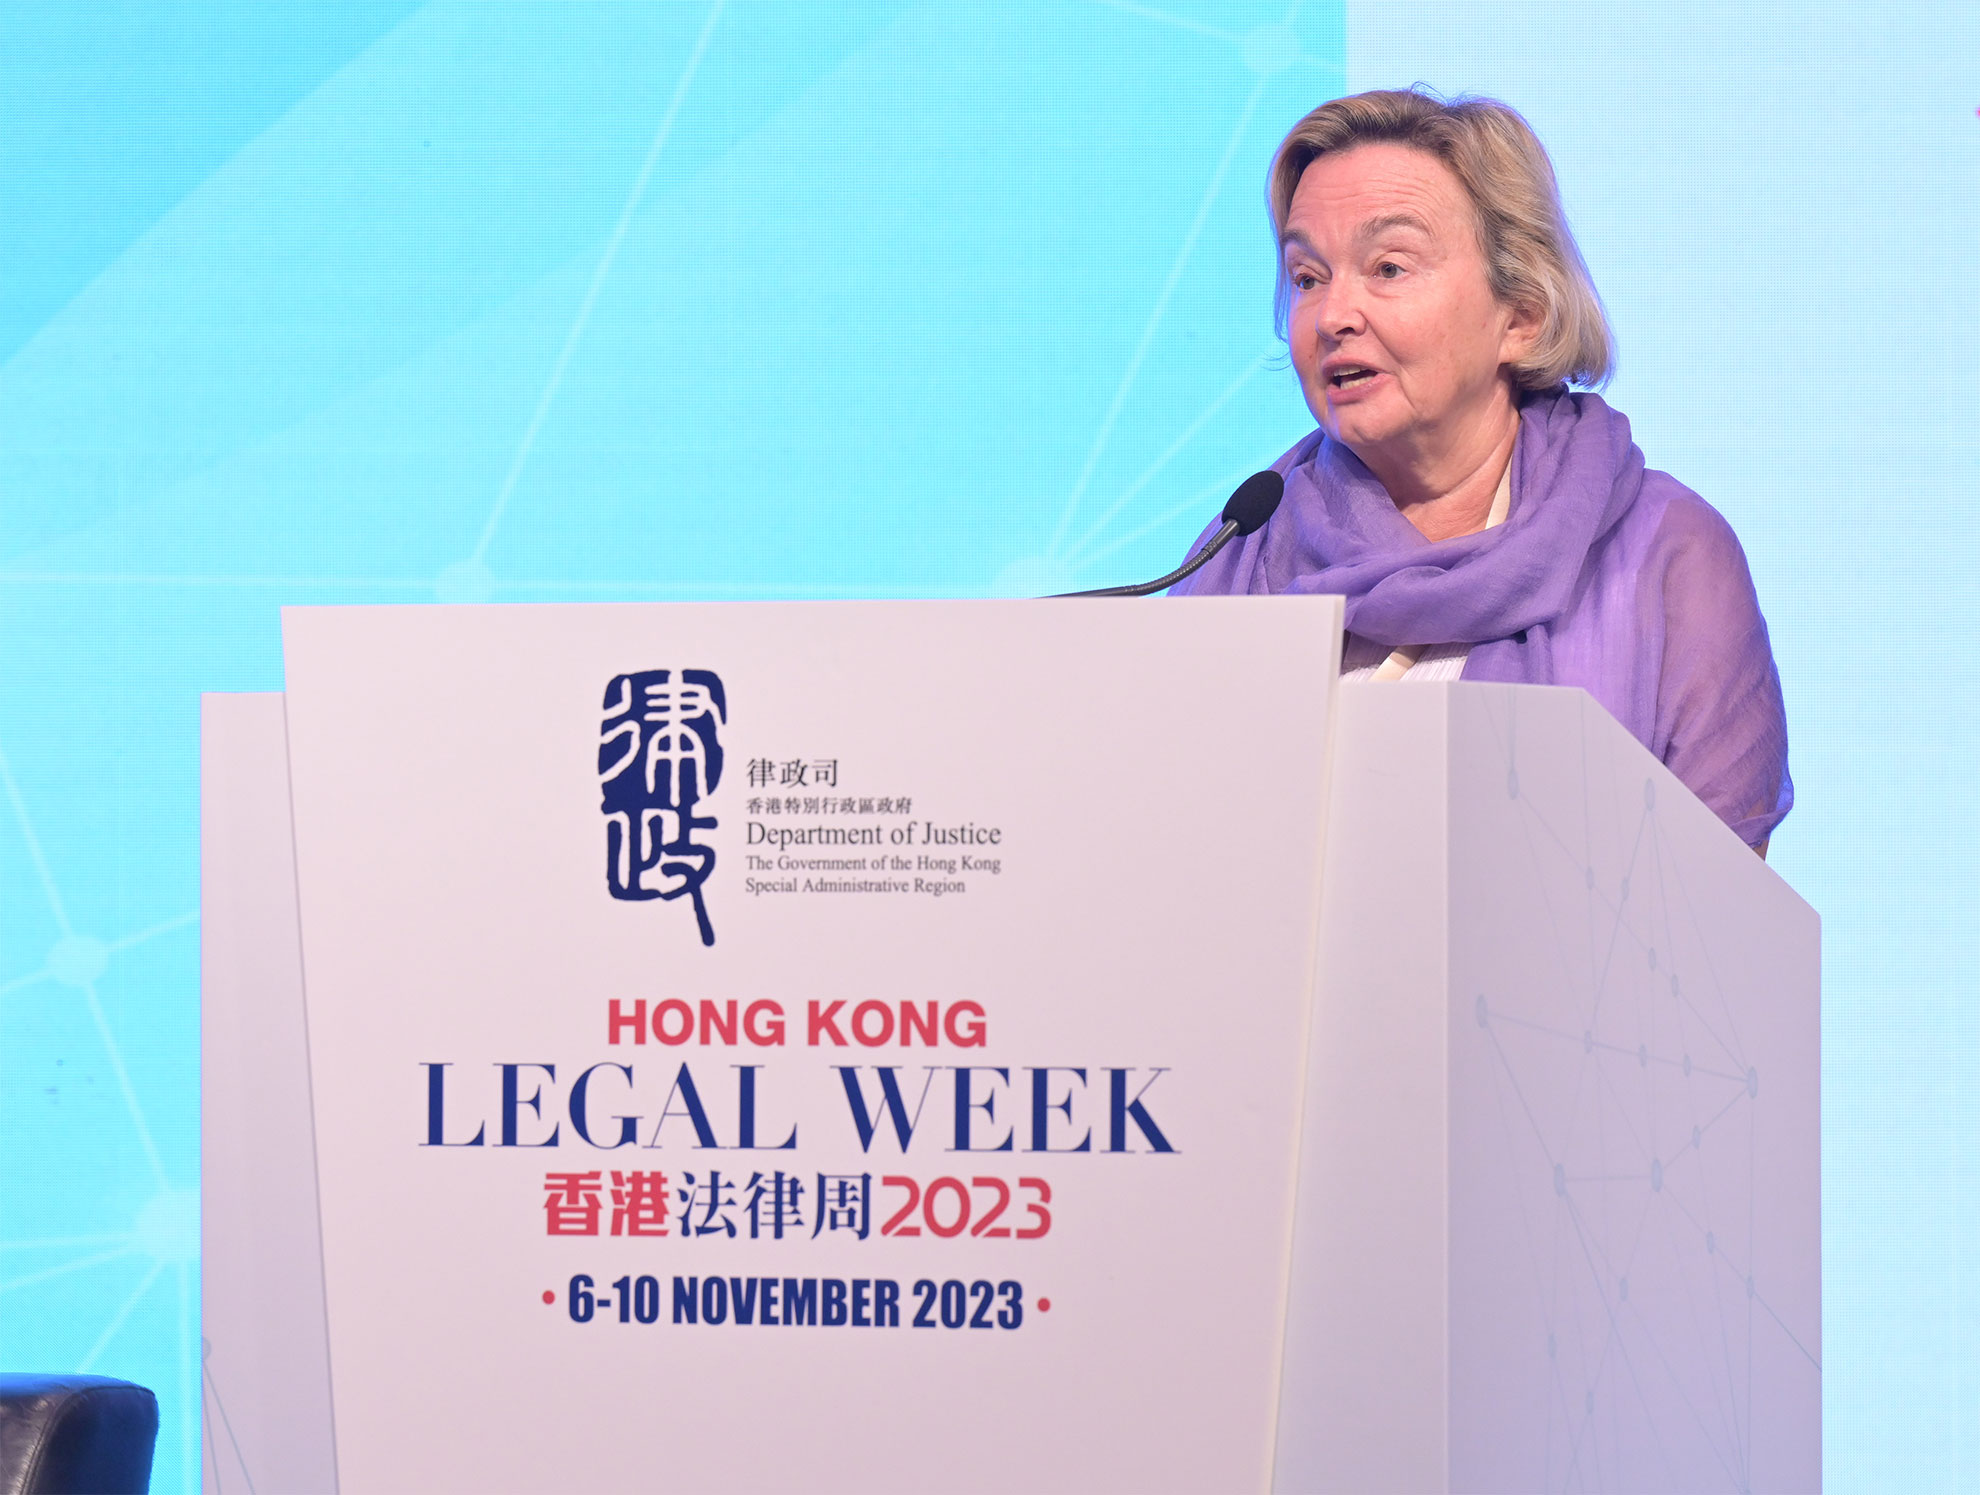 The Secretary of the United Nations Commission on International Trade Law, Ms Anna Joubin-Bret, delivers welcome remarks at the 5th UNCITRAL Asia Pacific Judicial Summit - Judicial Conference under the Hong Kong Legal Week 2023 today (November 6).